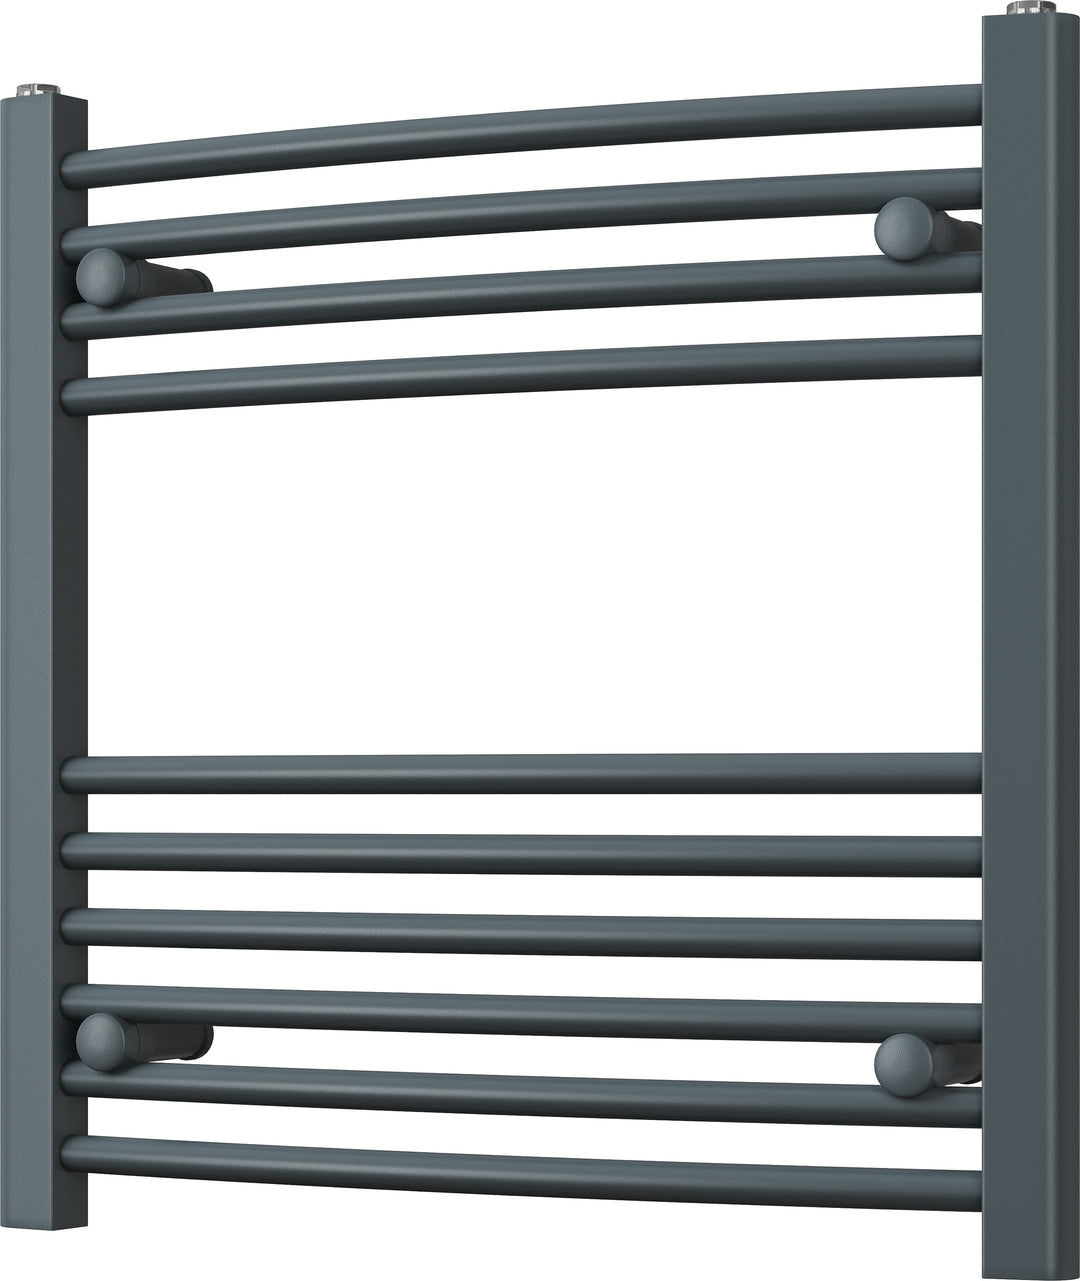 Zennor - Anthracite Heated Towel Rail - H600mm x W600mm - Curved